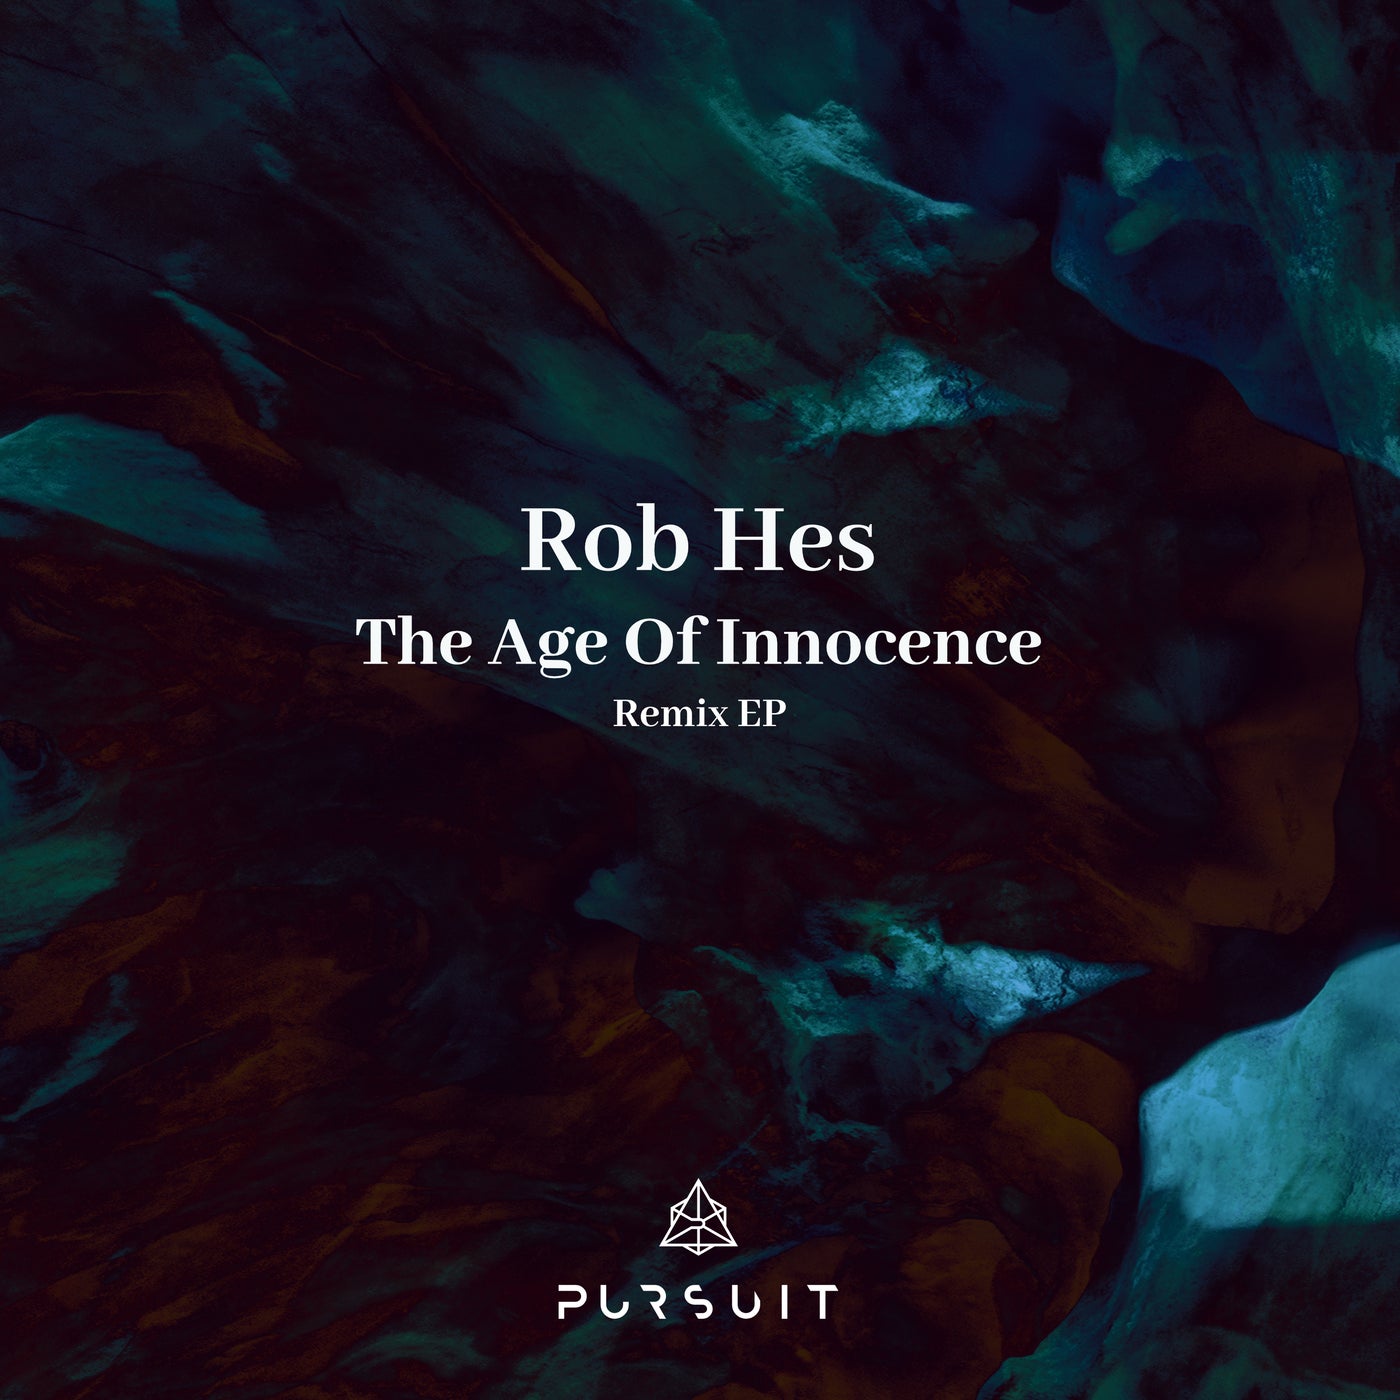 Download The Age Of Innocence Remix EP on Electrobuzz